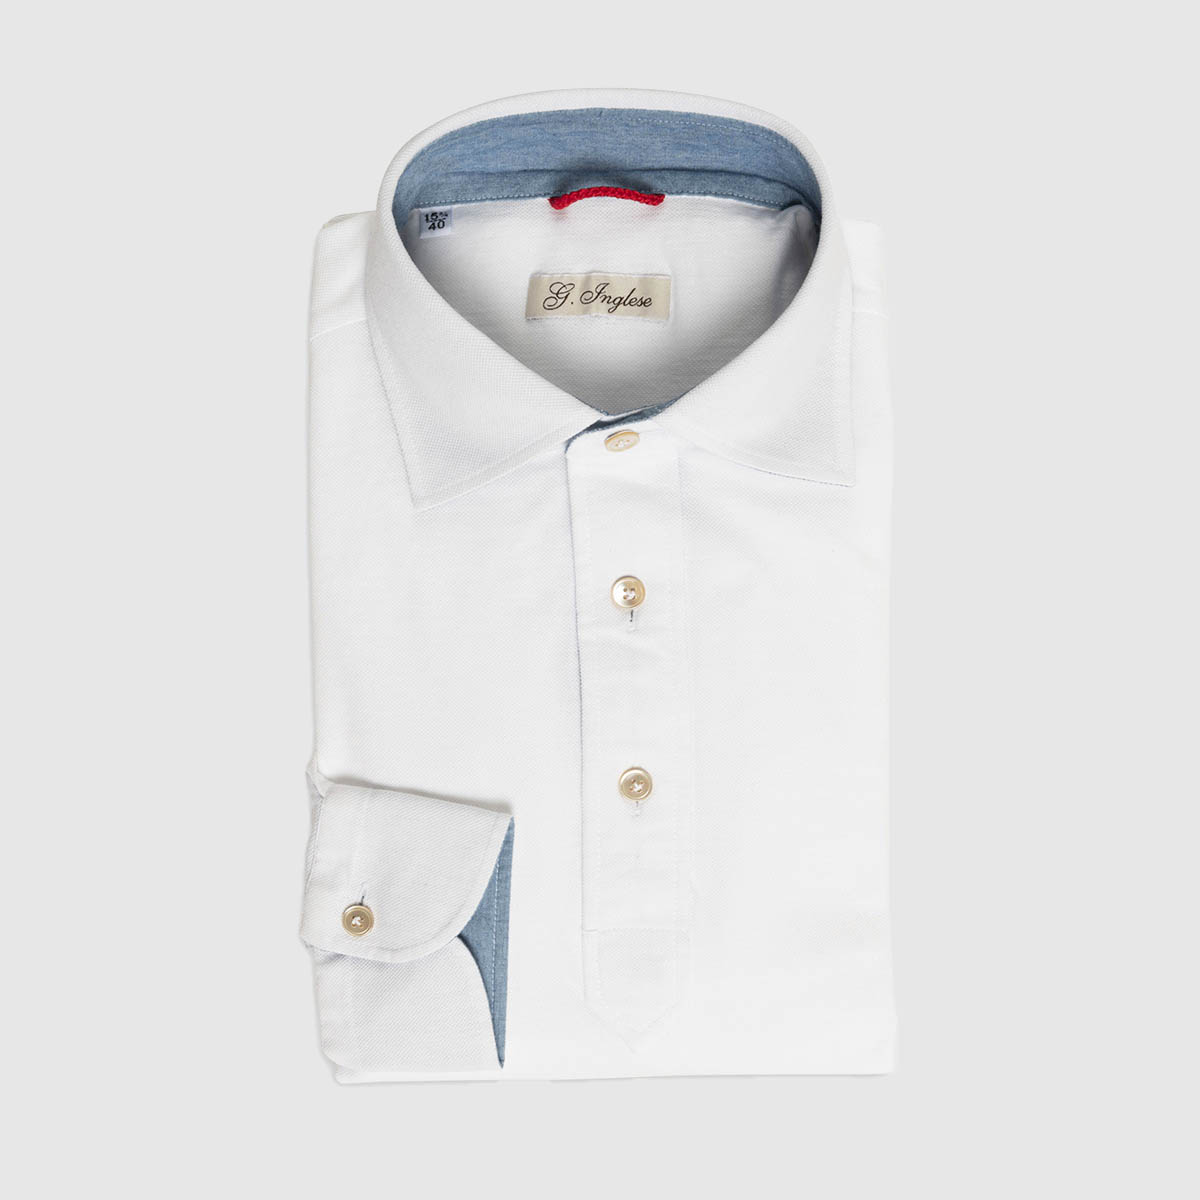 Piquet Polo Shirt in White Cotton with Denim inserts G. Inglese on sale 2022